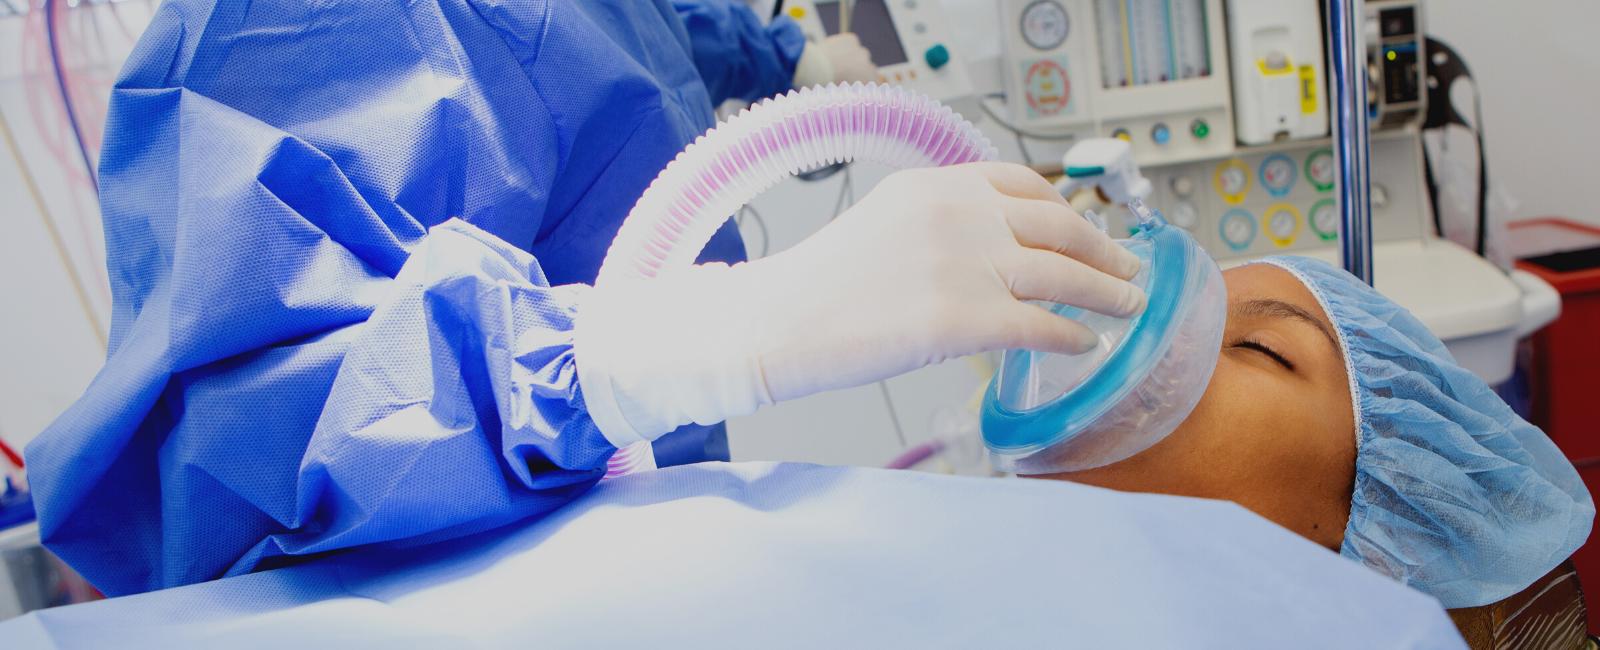 Effect of Magnesium on General Anesthesia in Children